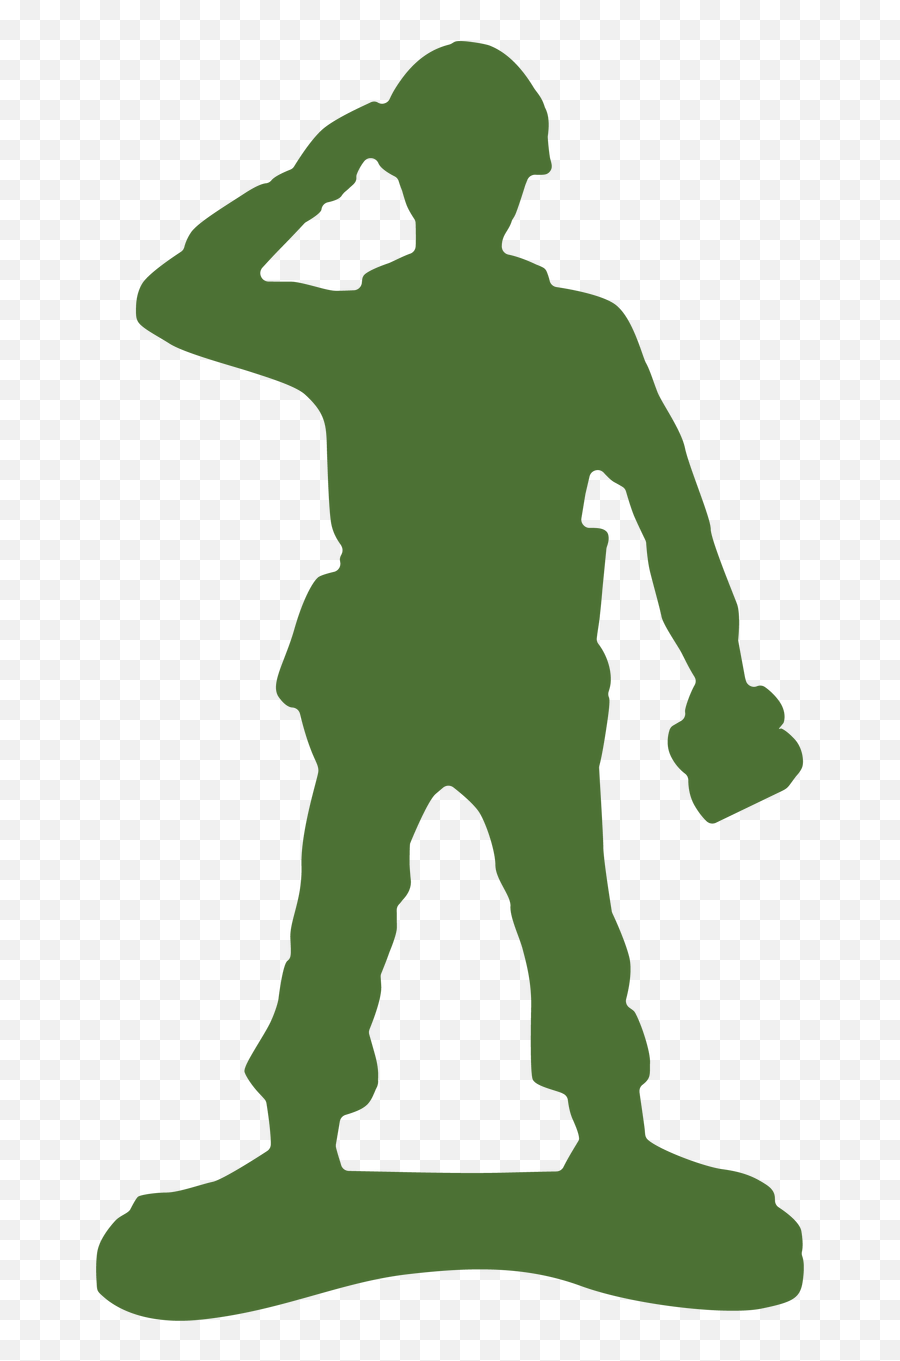 Army Men Clip Art Png Image - Toy Army Men Clipart,Army Men Png